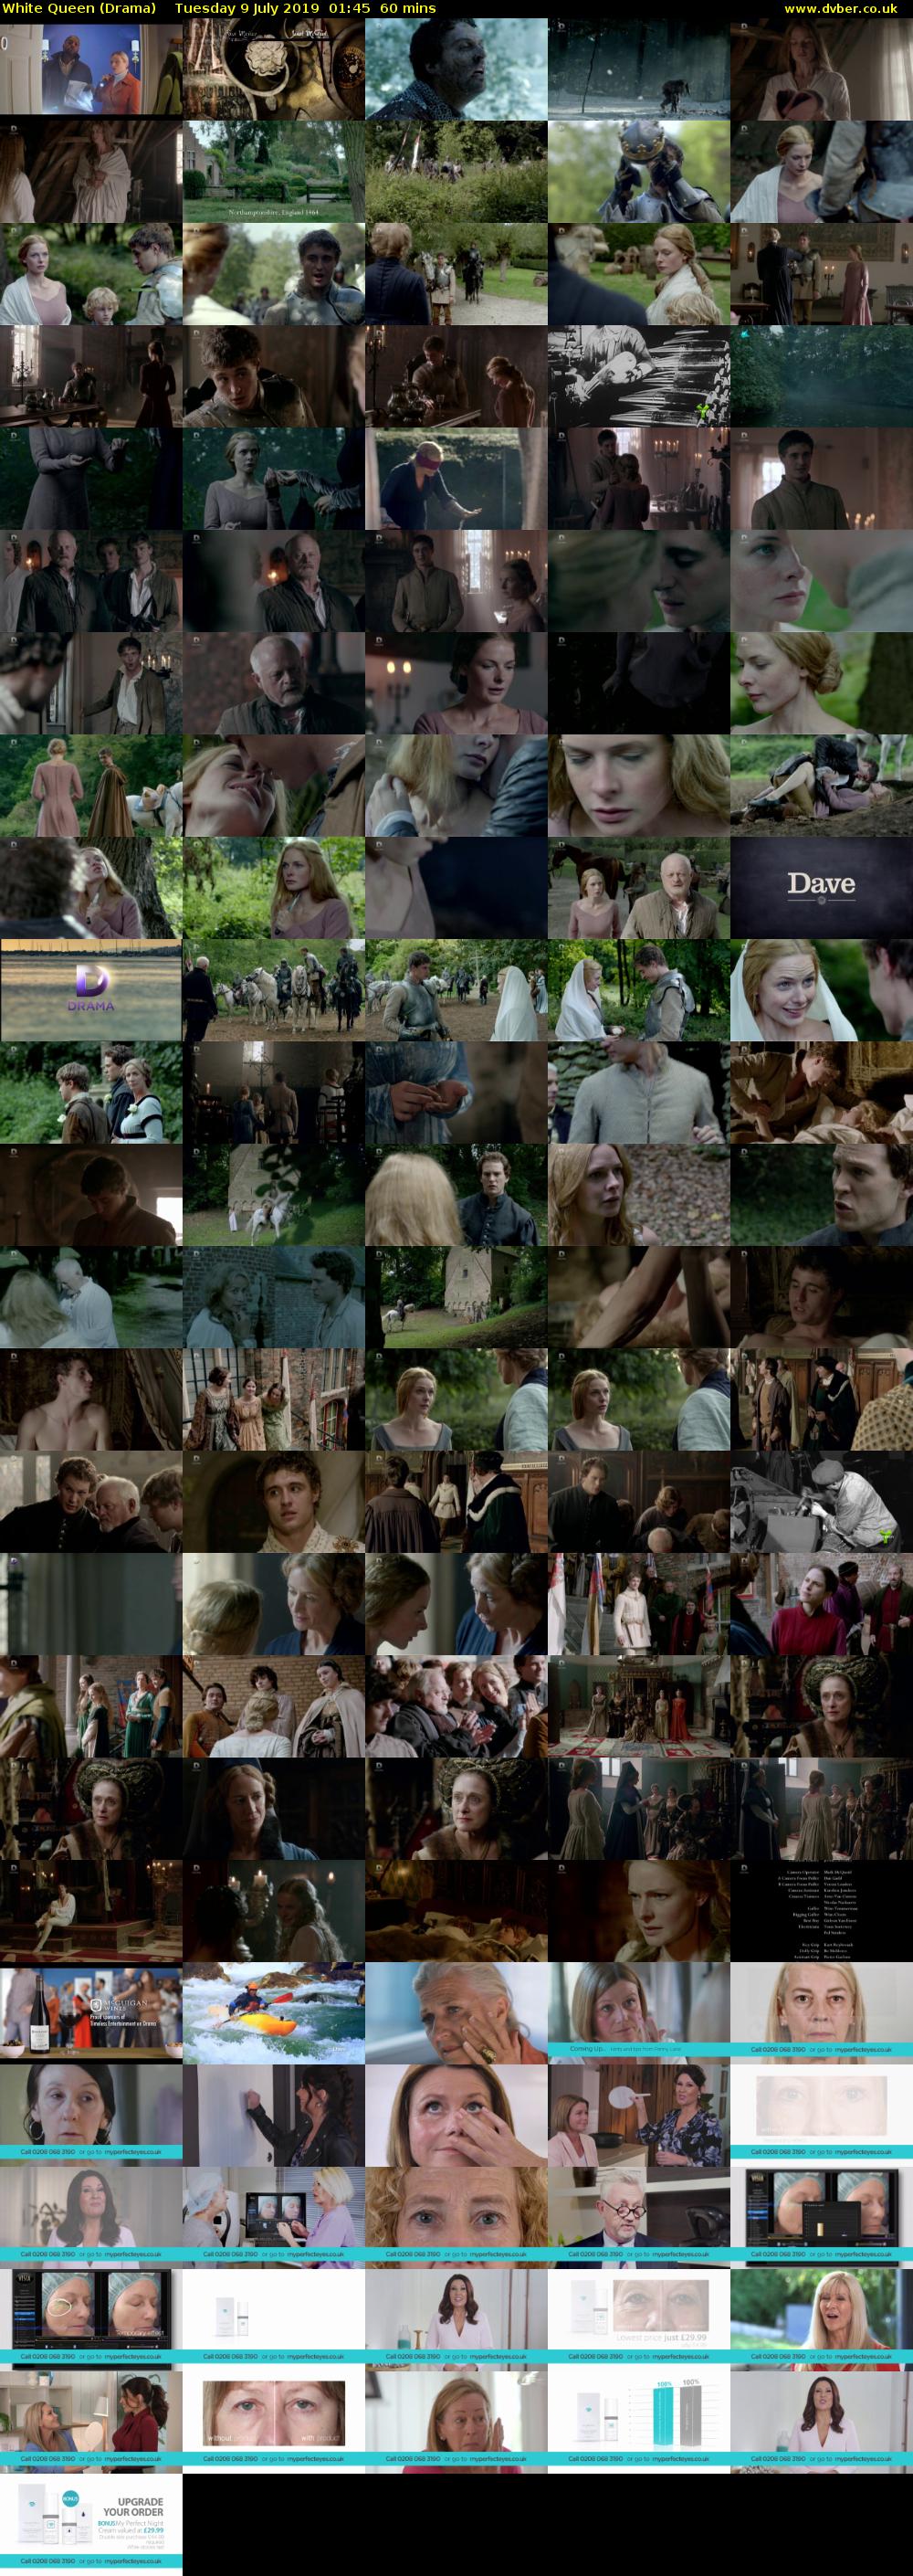 White Queen (Drama) Tuesday 9 July 2019 01:45 - 02:45